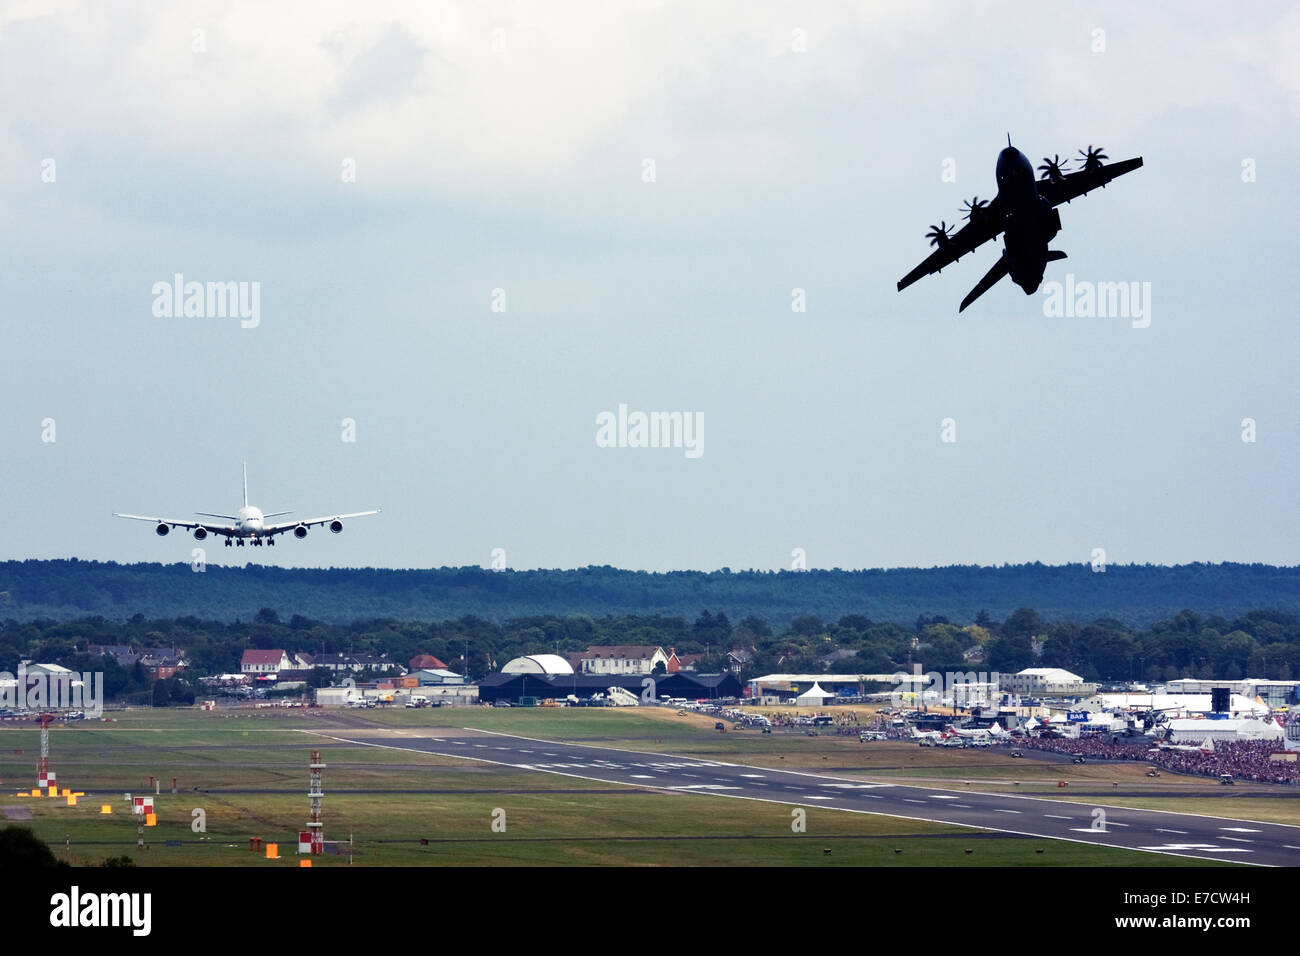 Airbus A380-841 landing and Airbus A400M Atlas taking off at runway of Farnborough International Airshow 2014 Stock Photo